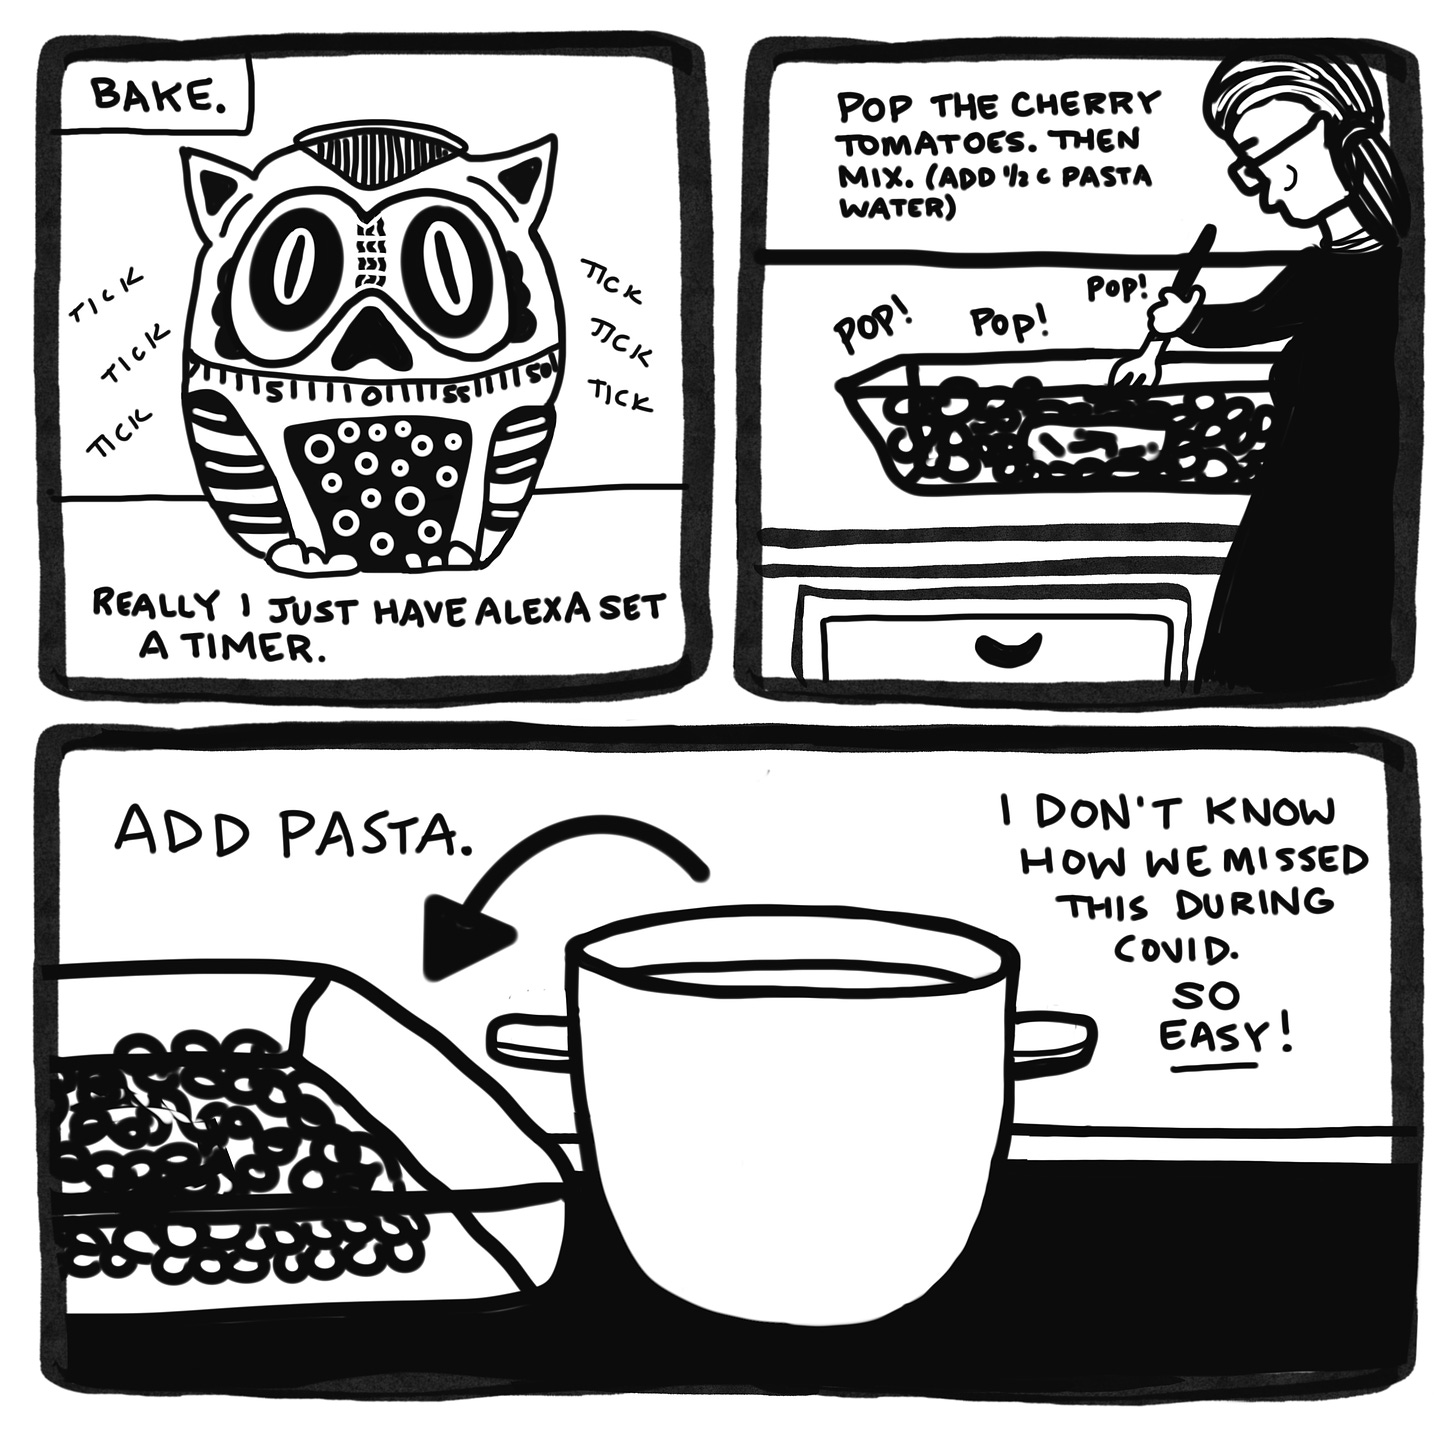 Panels 8-10 of a graphic novel set showing the making of Baked Feta Pasta